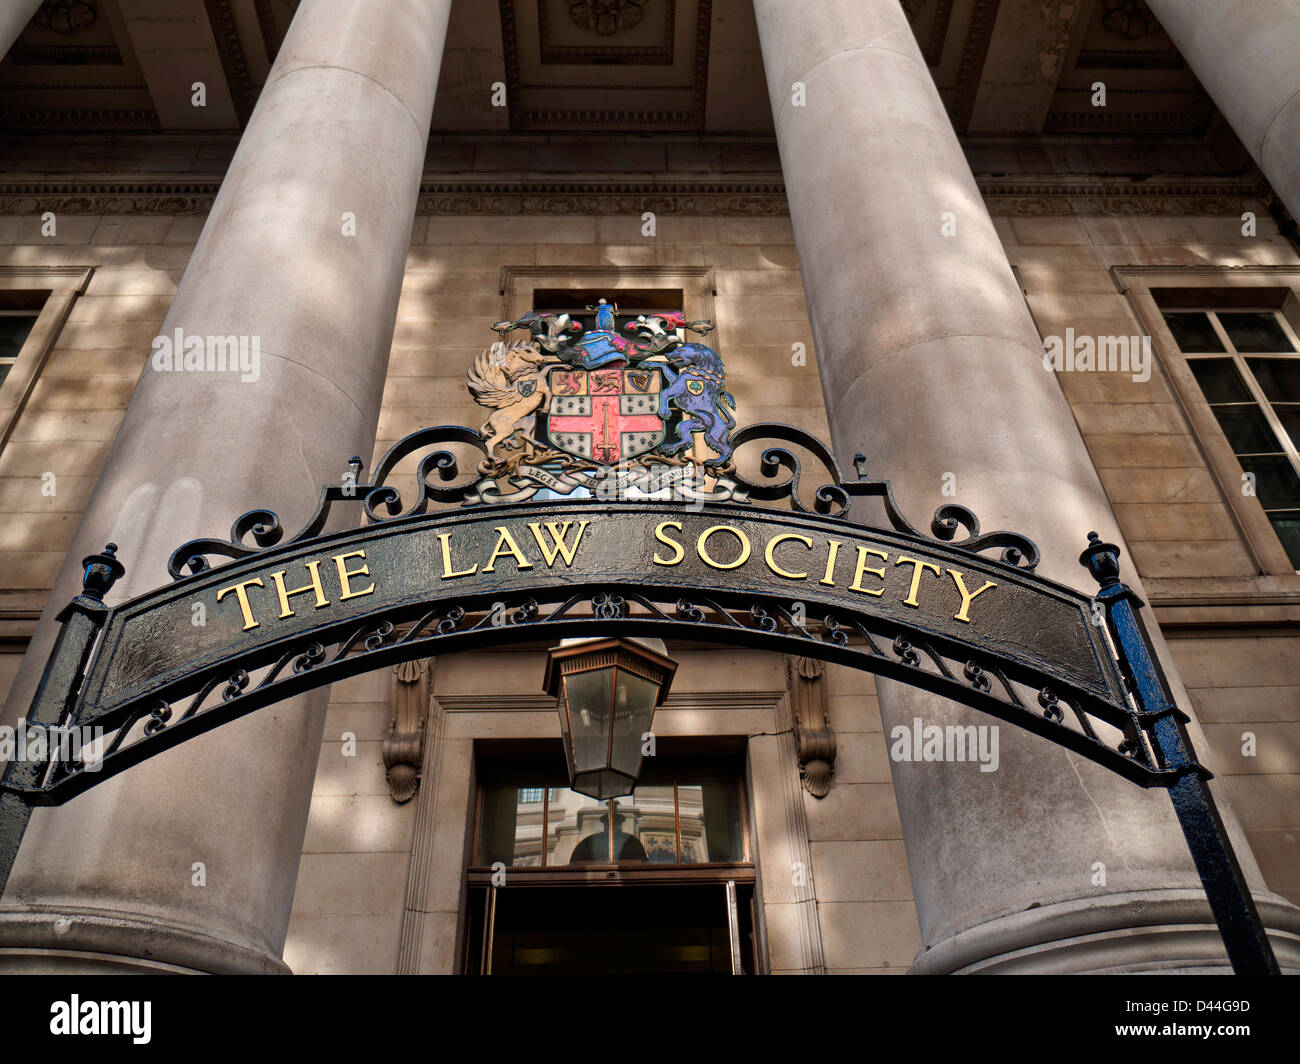 Exterior view of The Law Society building entrance Holborn London UK Stock Photo